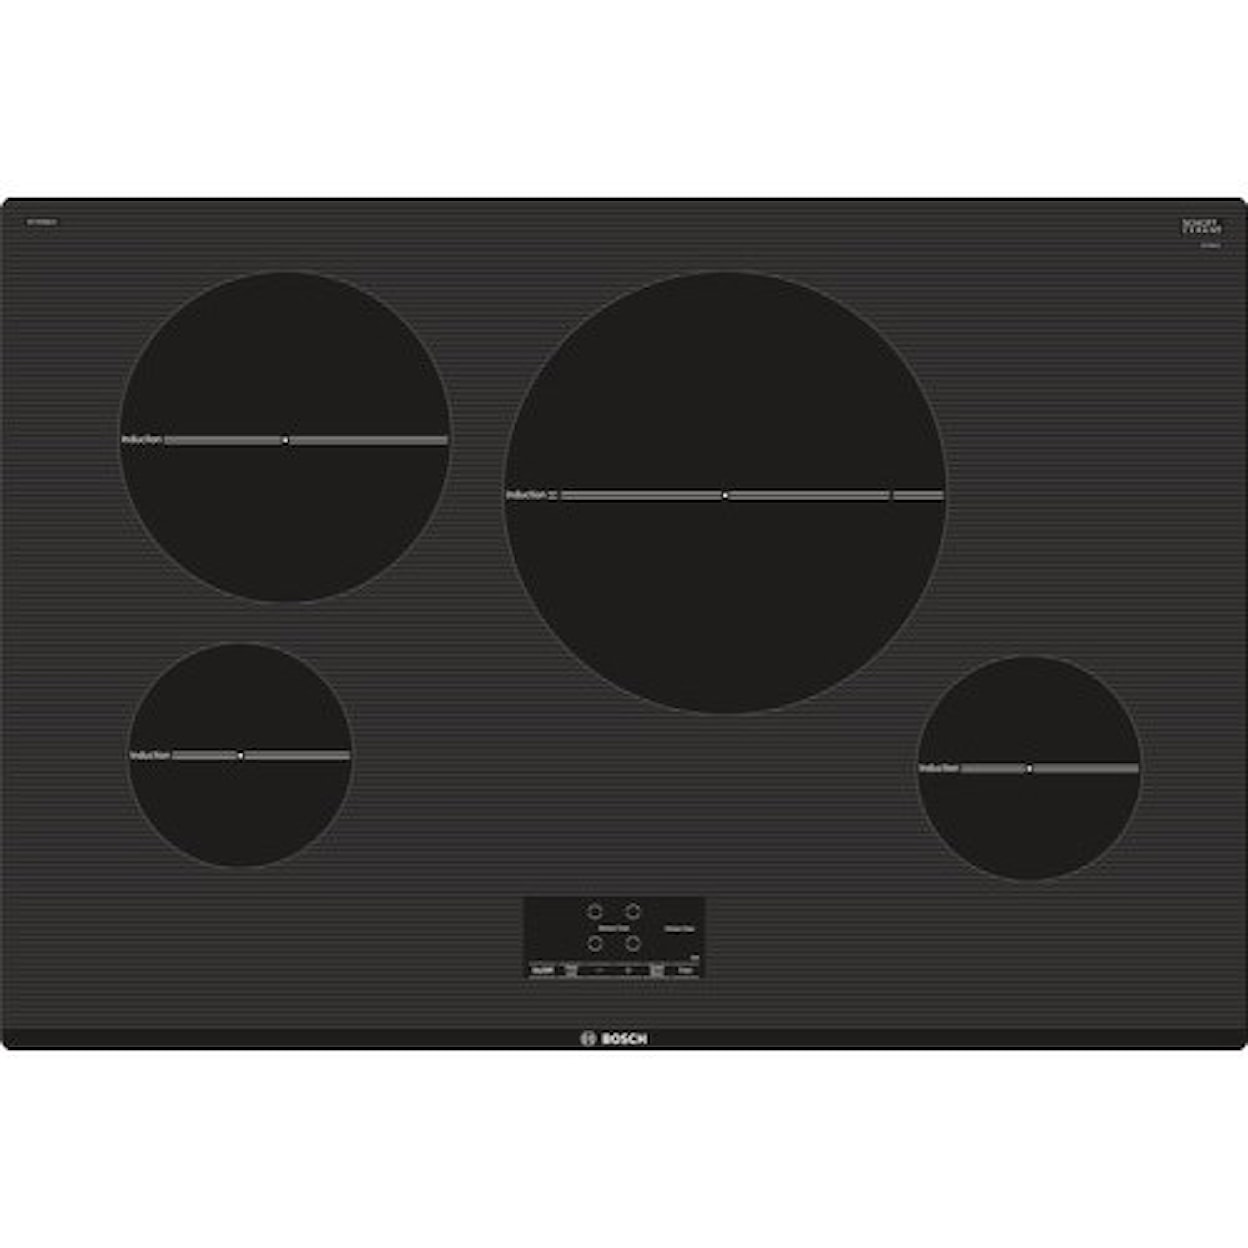 Bosch Induction Cooktops 30” Induction Cooktop - 500 Series